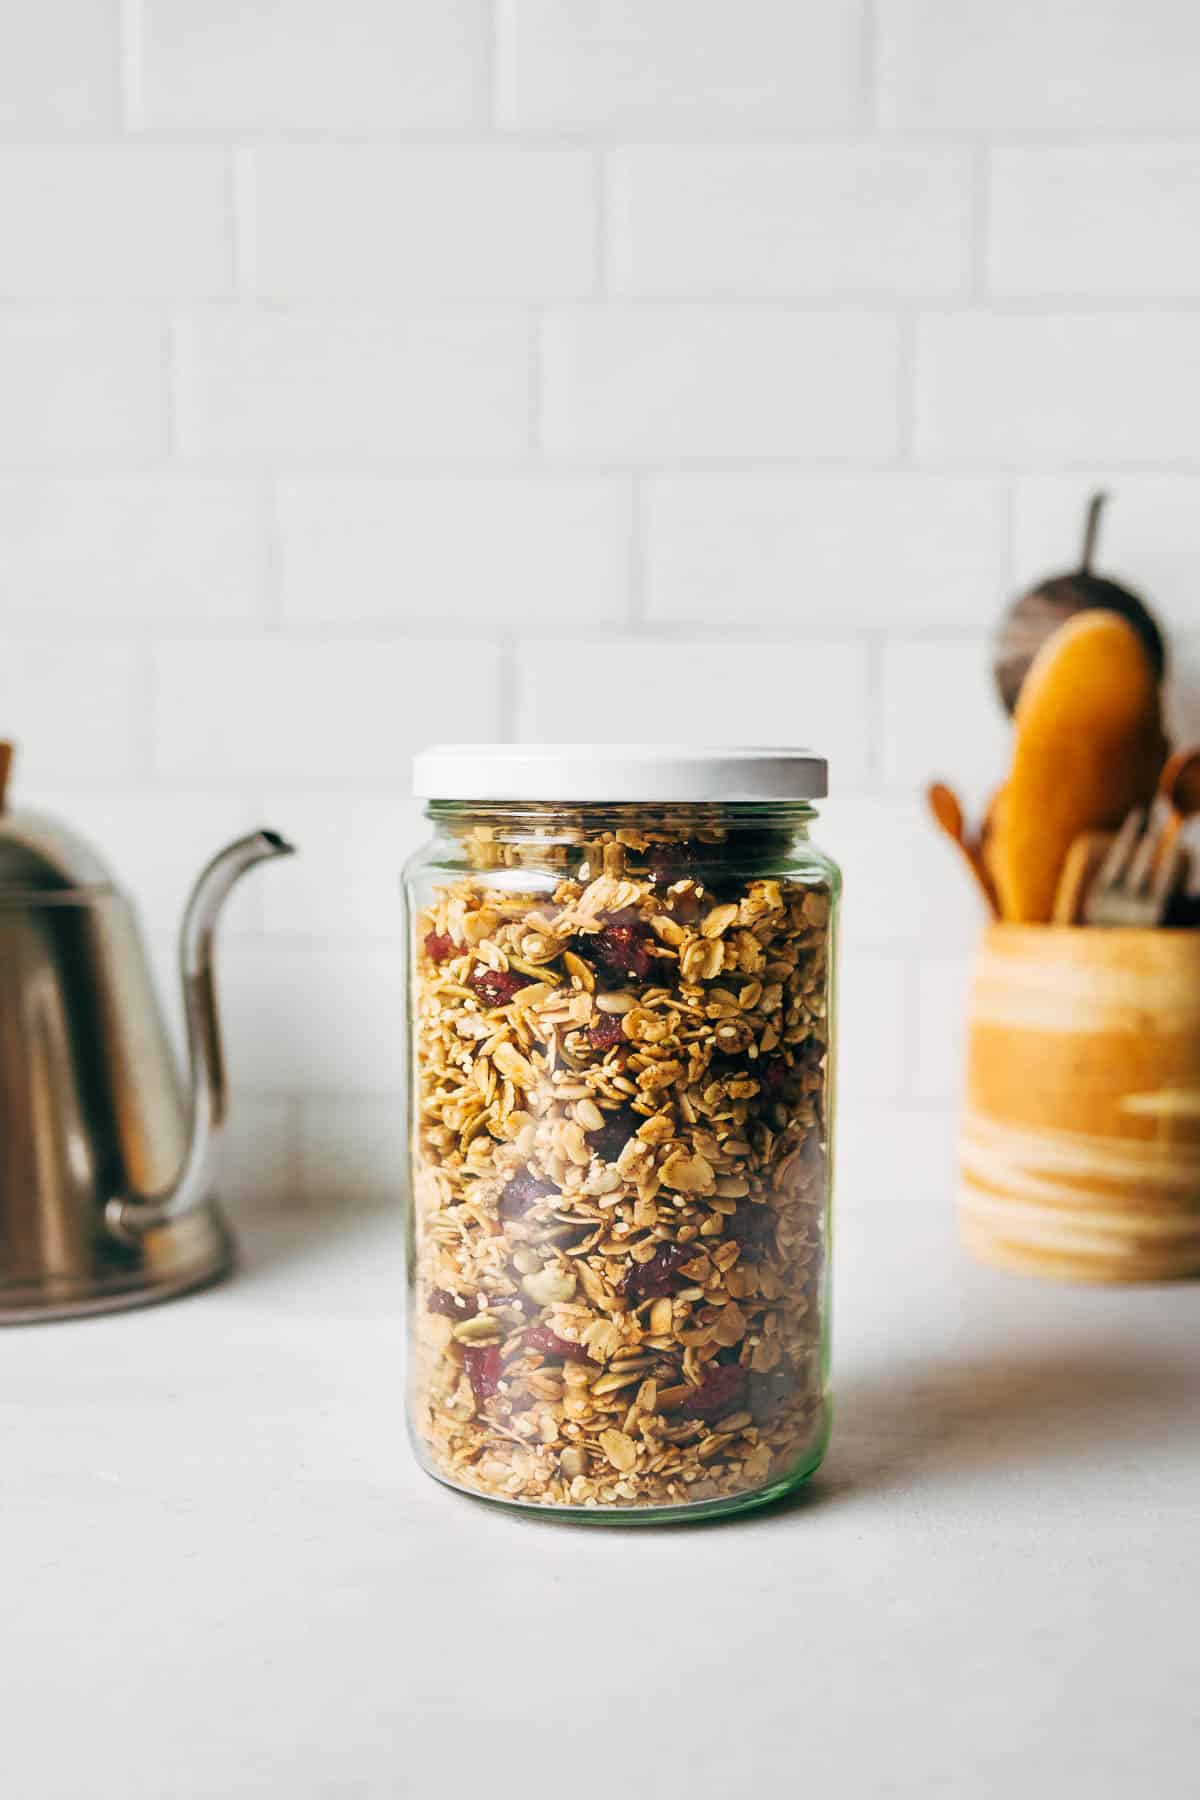 A glass jar of granola on the counter in a kitchen setting.